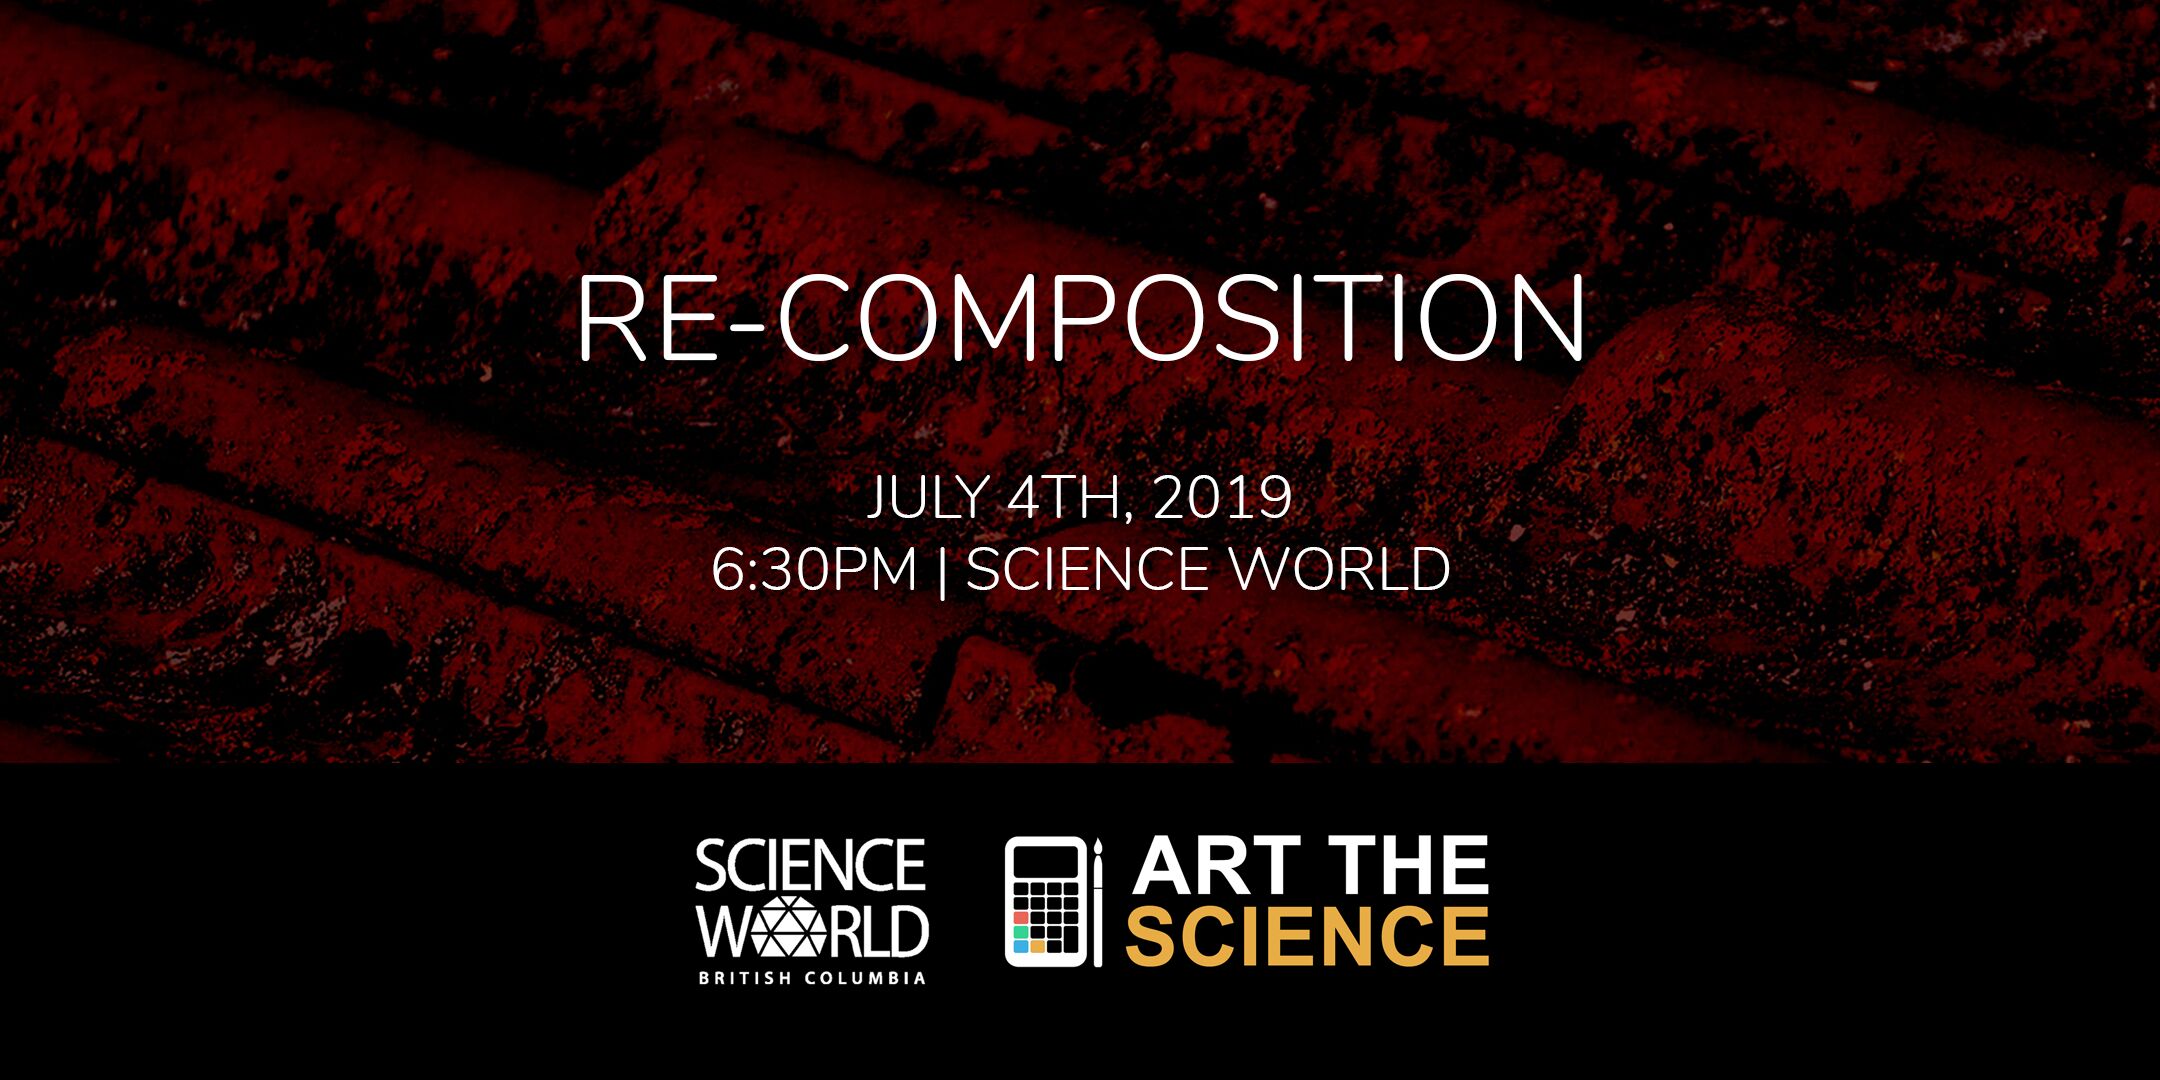 Art the Science RE-COMPOSITION